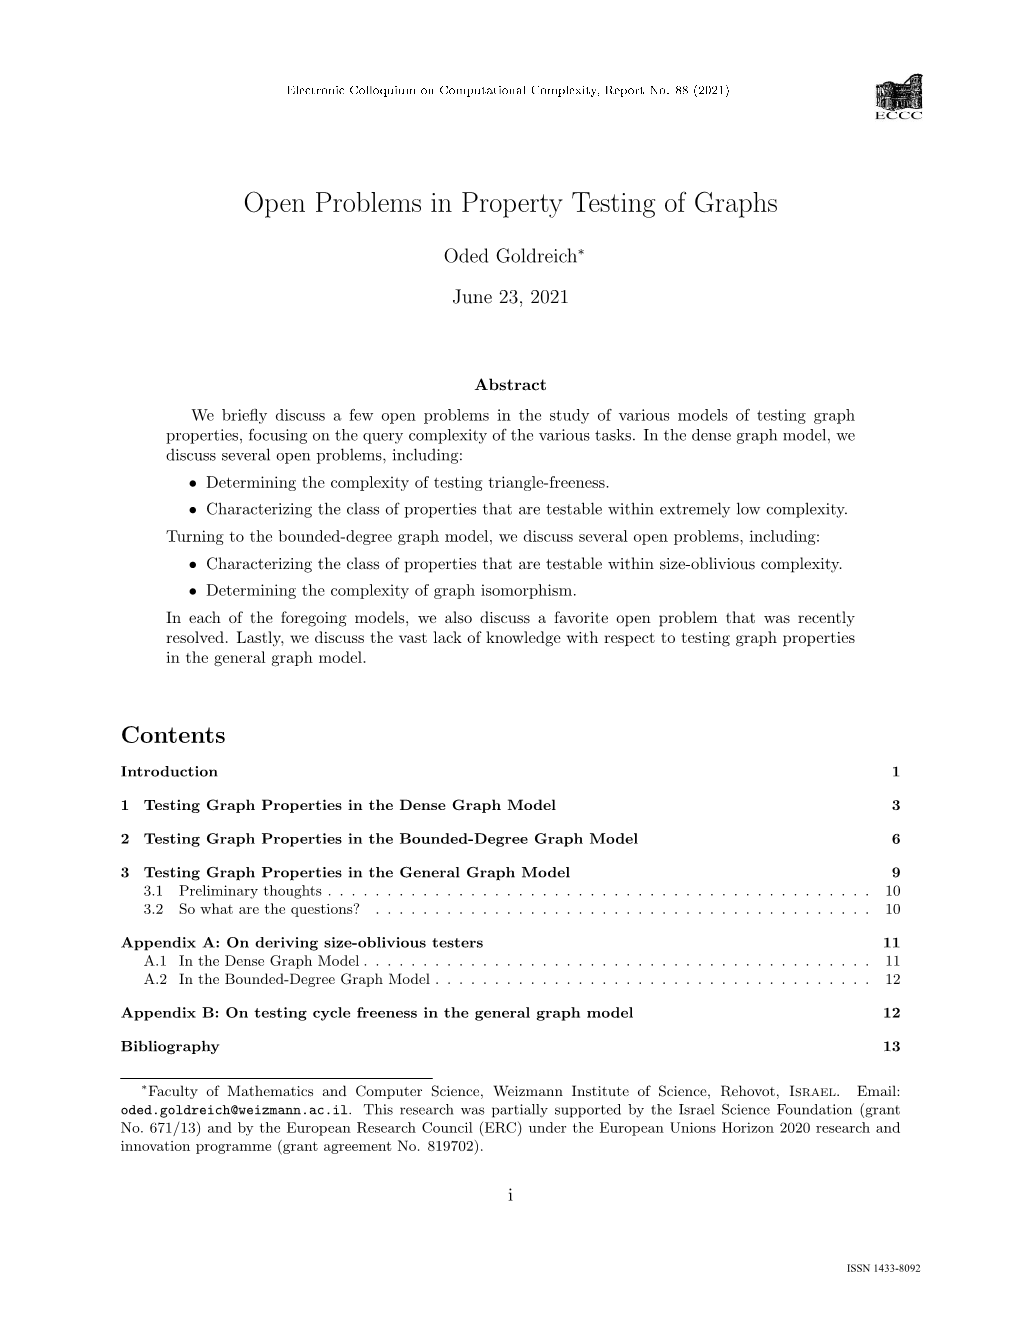 Open Problems in Property Testing of Graphs